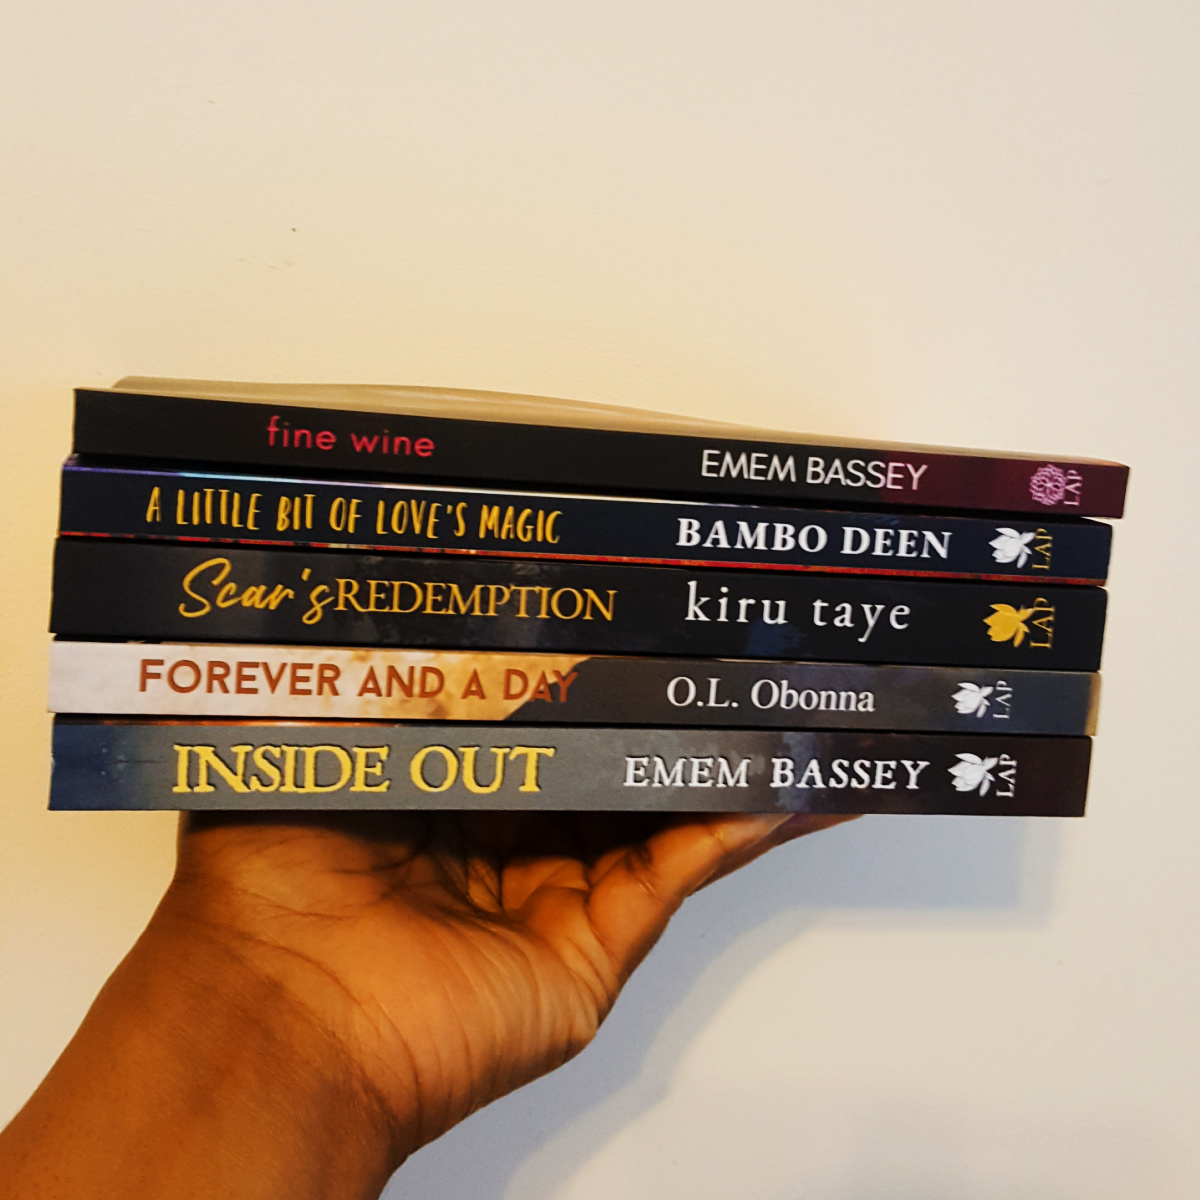 When you've been a good girl and santa delivers your #Christmaswishlist. 😎
📷
🎄Fine Wine by @ememjamesbassey
🎄A Little Bit of Love's Magic by @DeenBambo 
🎄Scar's Redemption by @KiruTaye 
🎄Forever and a Day by @omoscorner 
🎄Inside Out by Emem Bassey

#BlackRomance #Africans